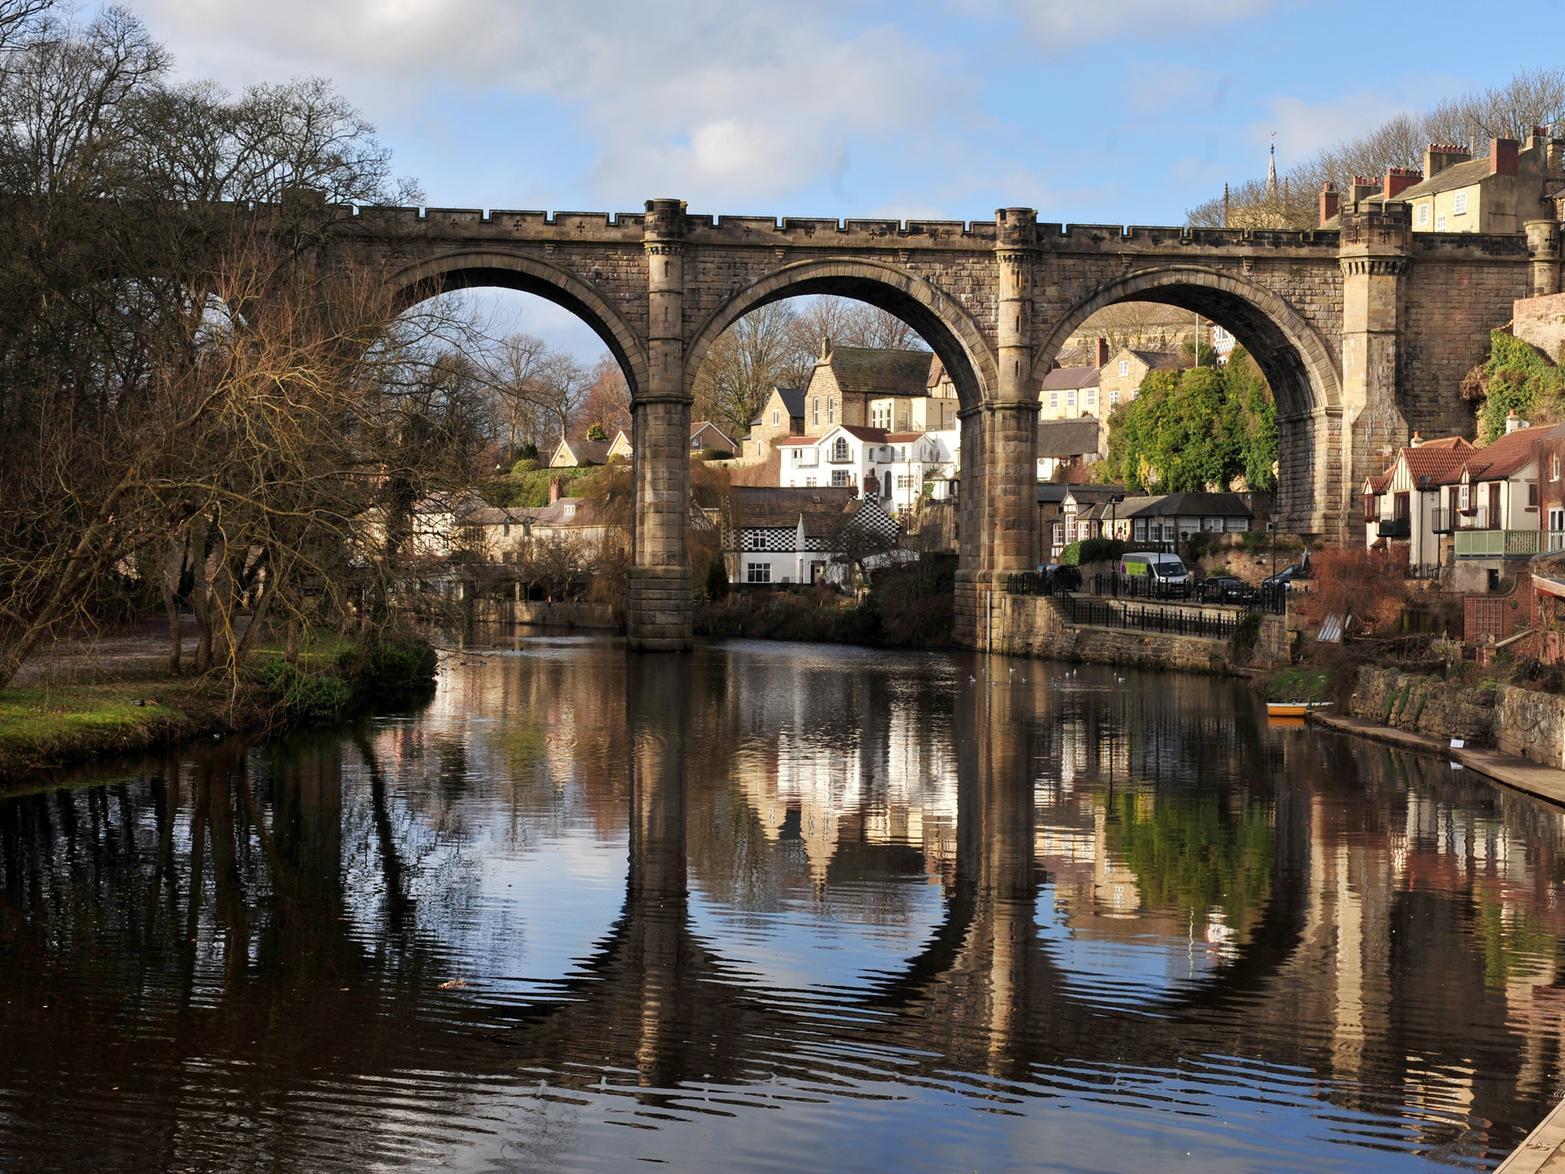 Take in the winter sunshine as it glints off the River Nidd in Knaresborough.